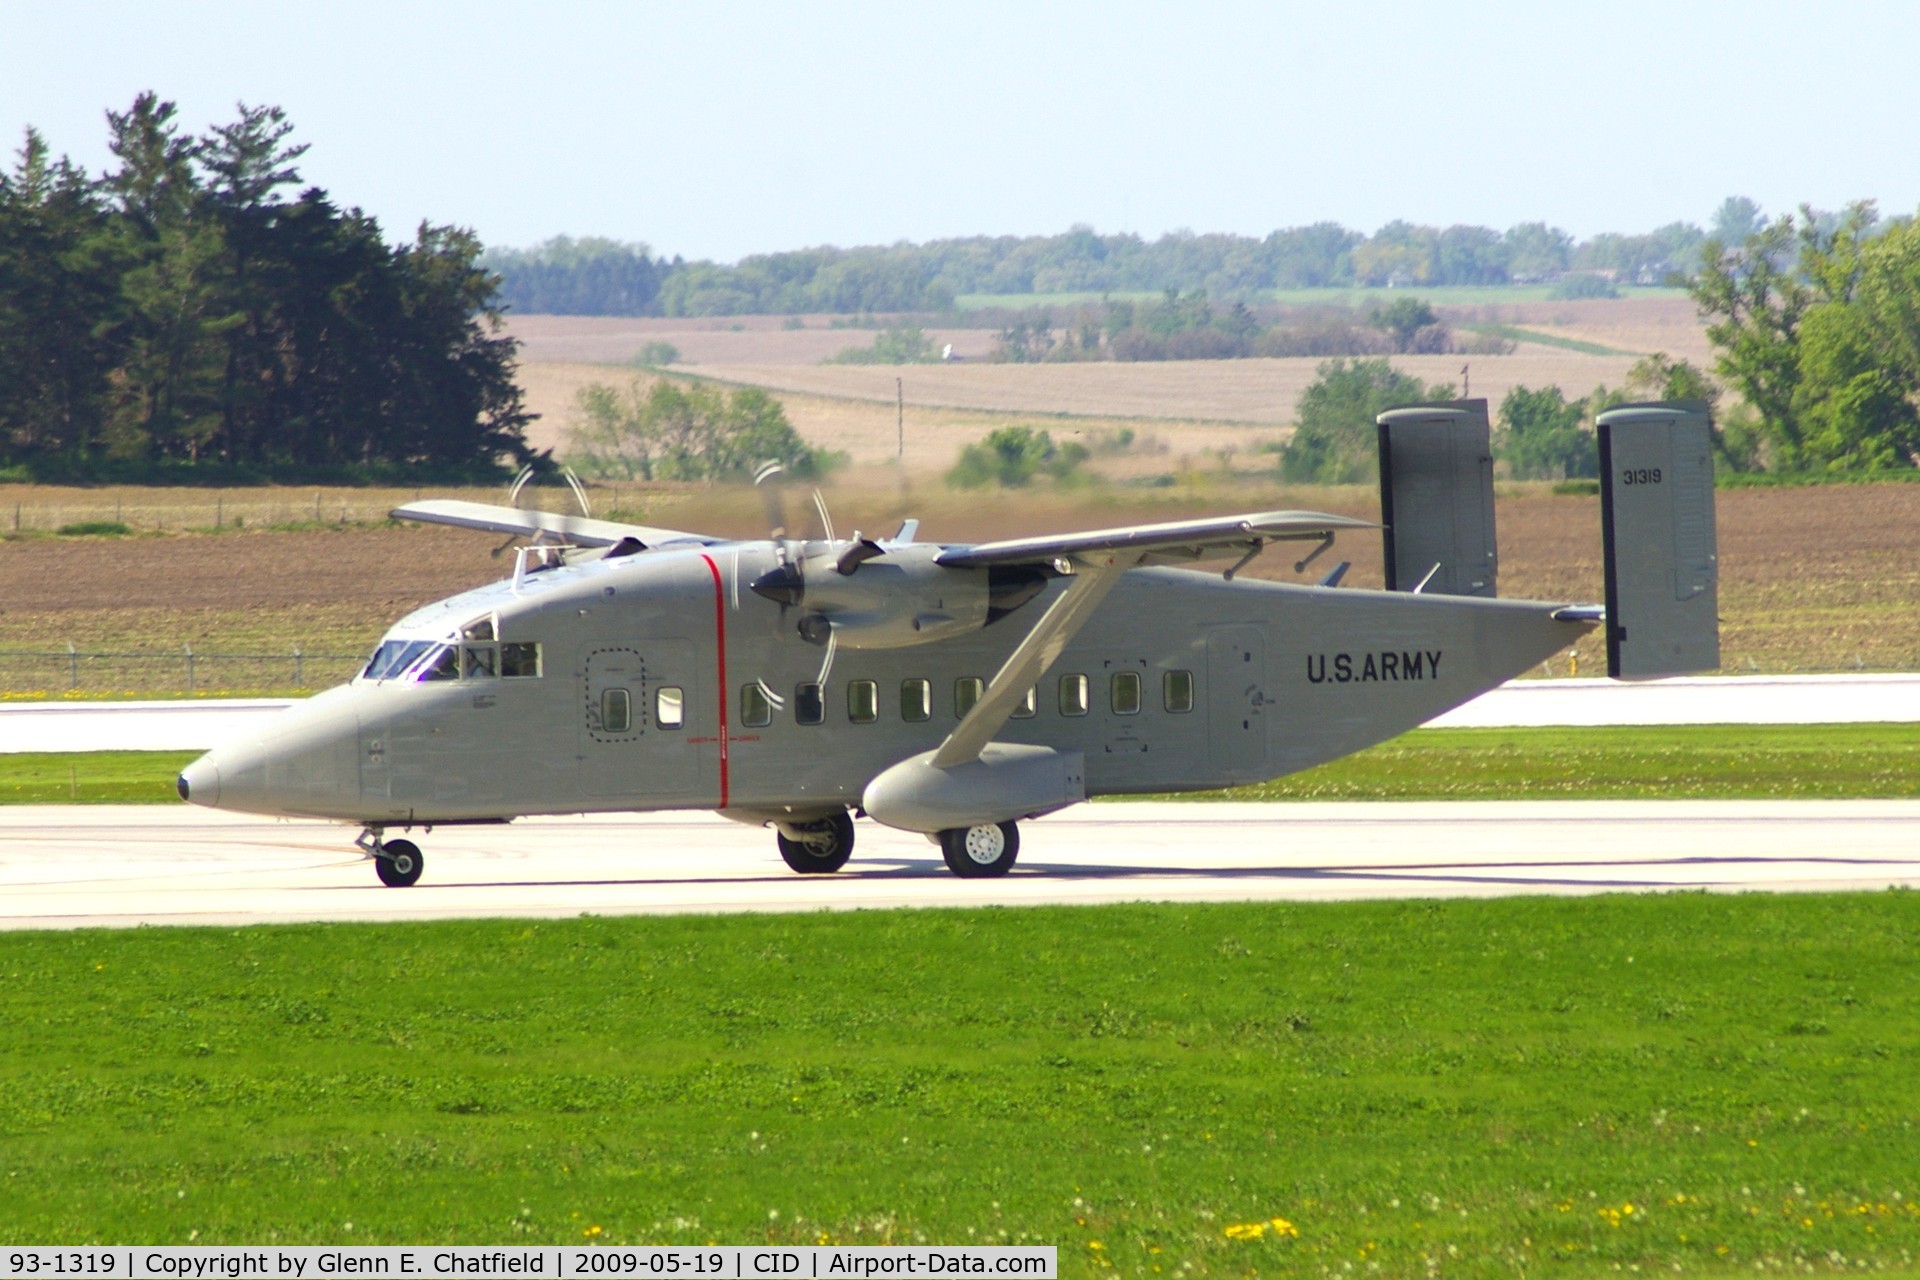 93-1319, 1993 Short C-23B Sherpa C/N AK-003, Taxiing on Alpha on the way to Rockwell-Collins